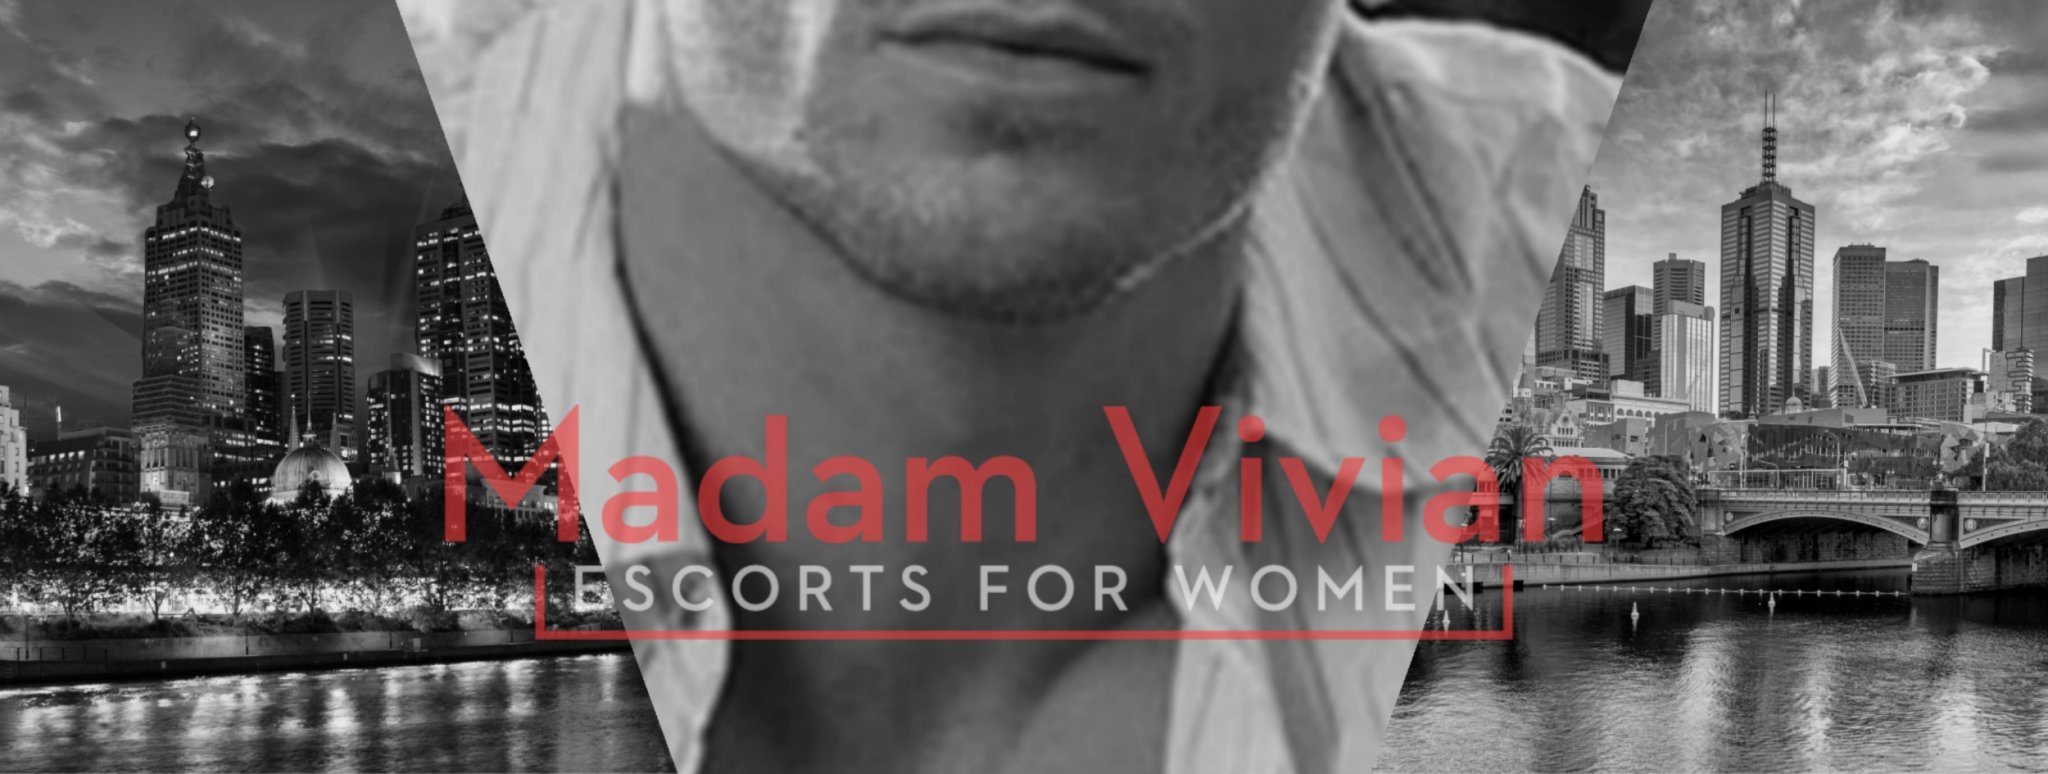 Andre male escort top banner